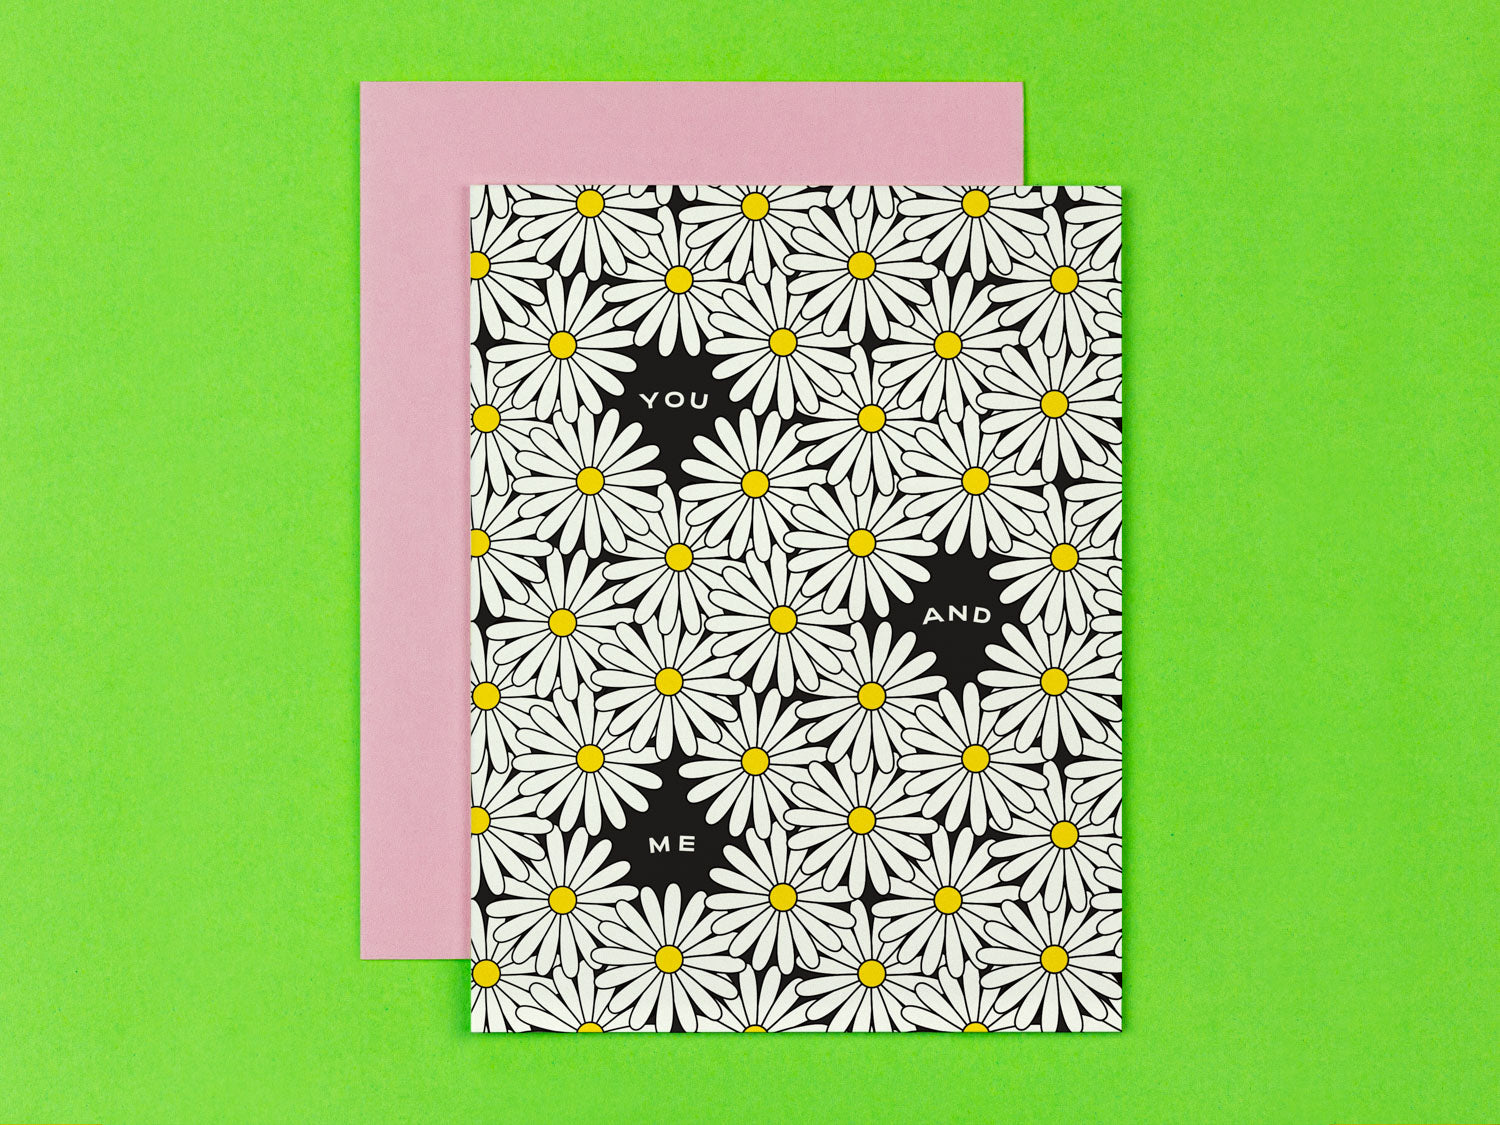 You and Me Daisy Love card or anniversary card with all over daisy pattern. Made in USA by My Darlin' @mydarlin_bk